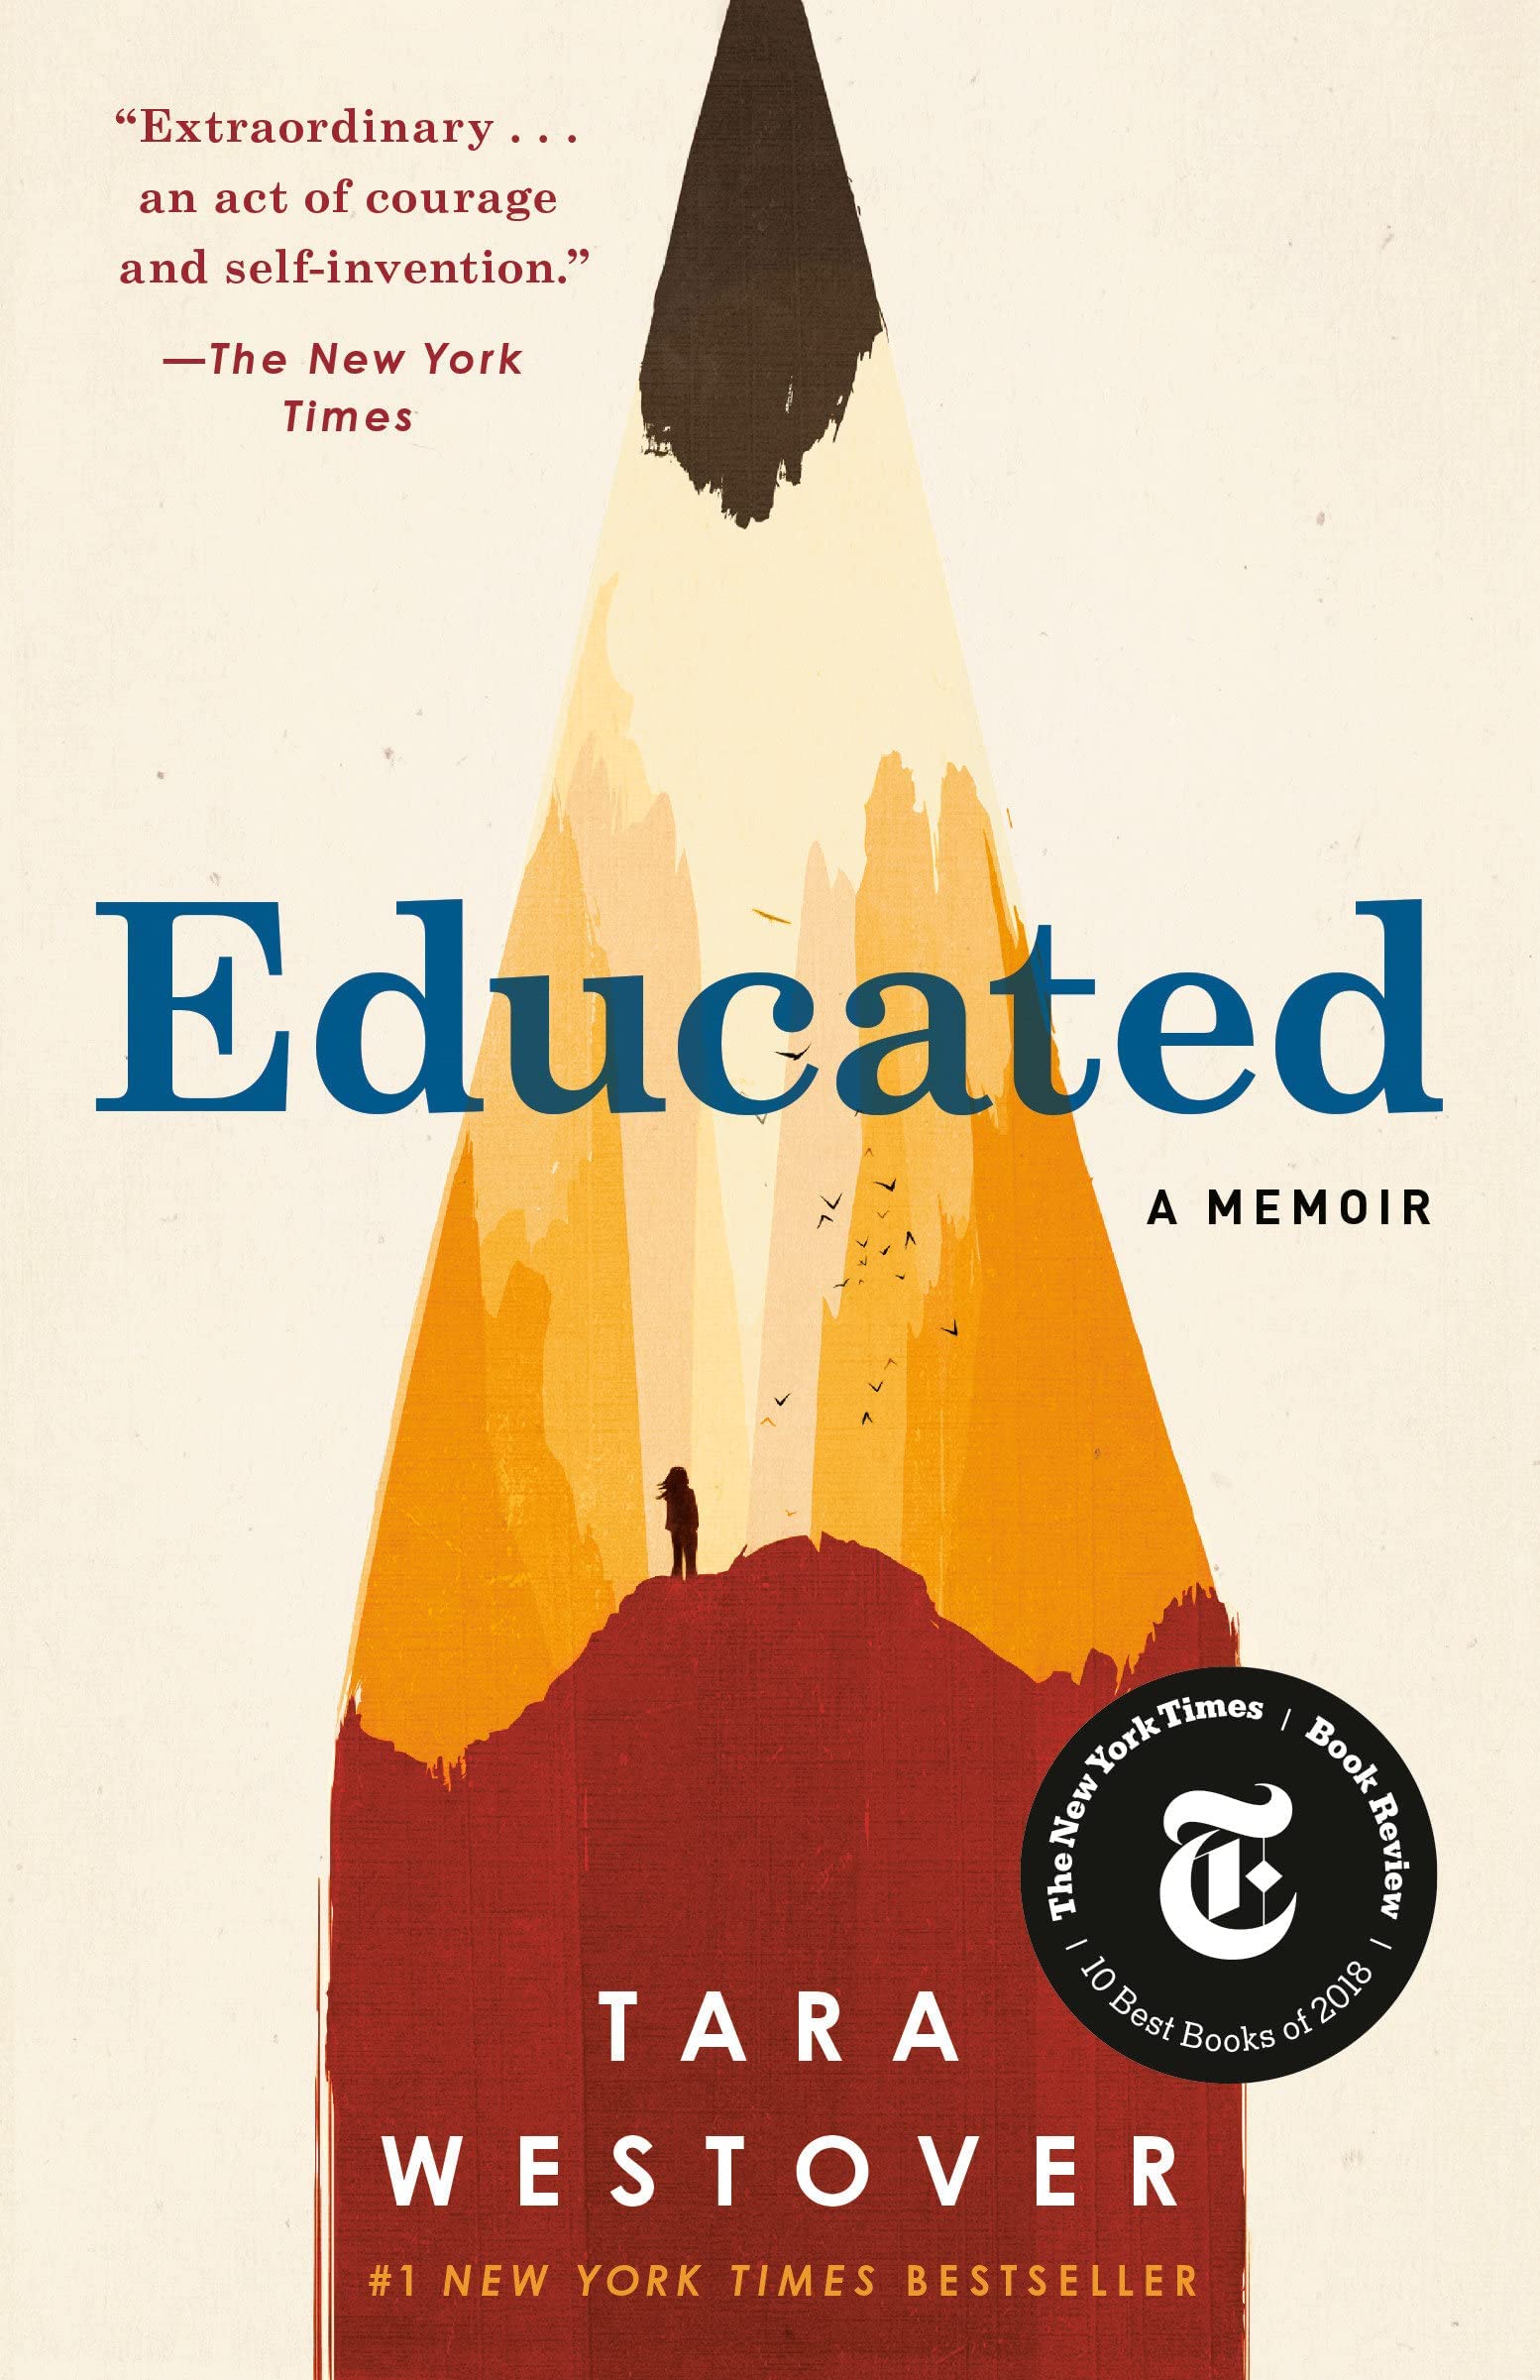 Book Cover - Educated by Tara Westover